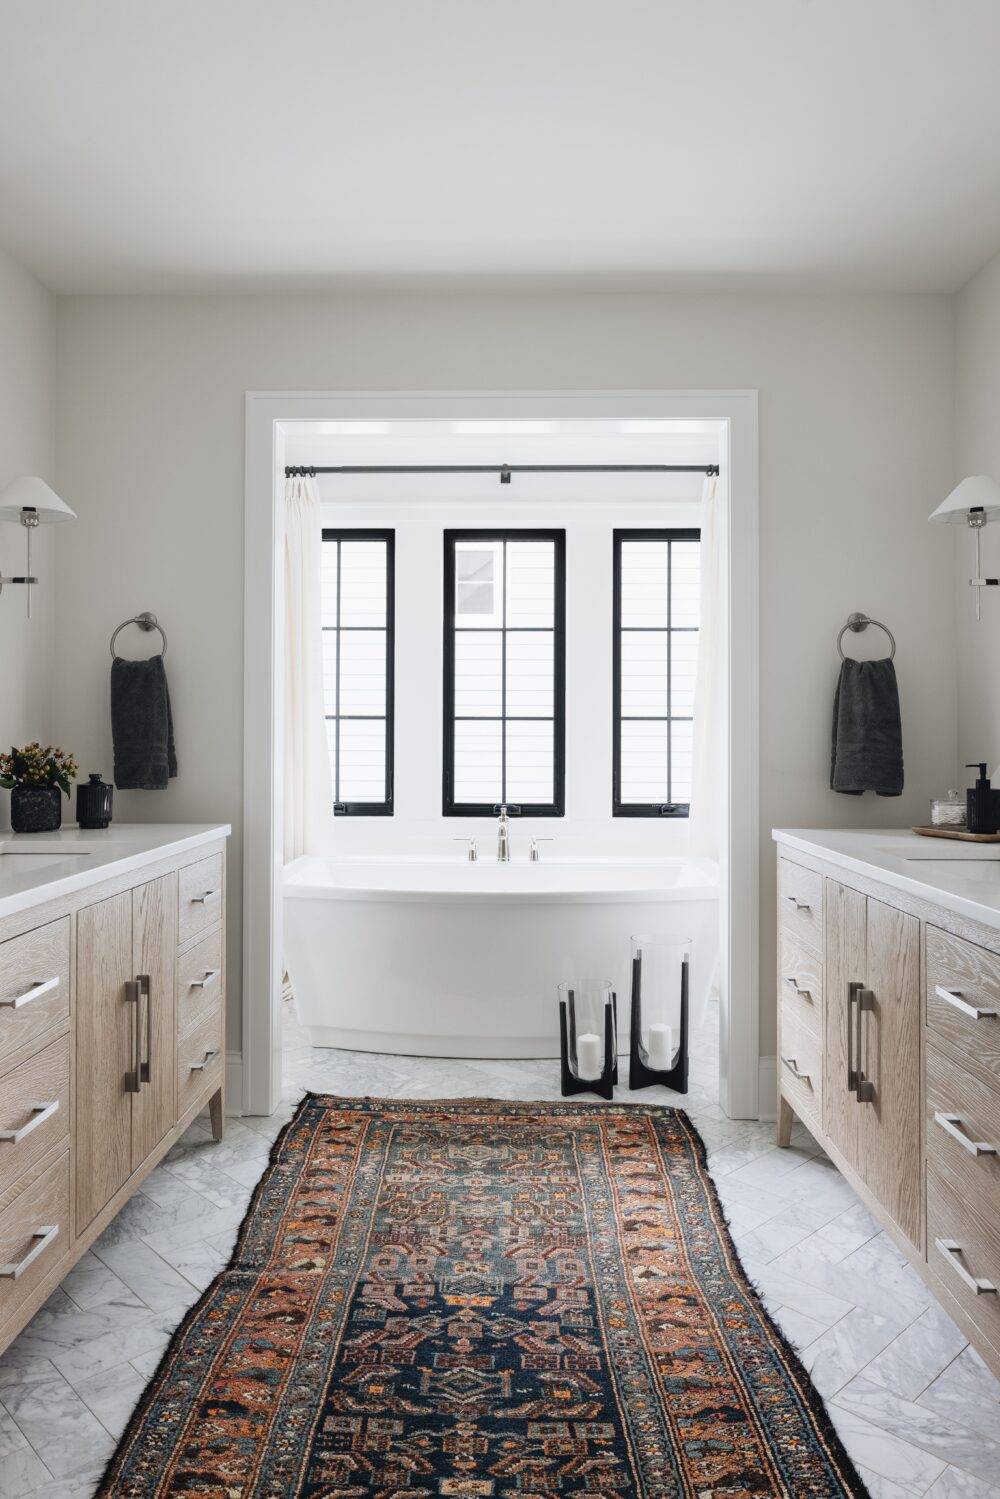 Open bathroom with a white tub and marble floor in a herringbone pattern.